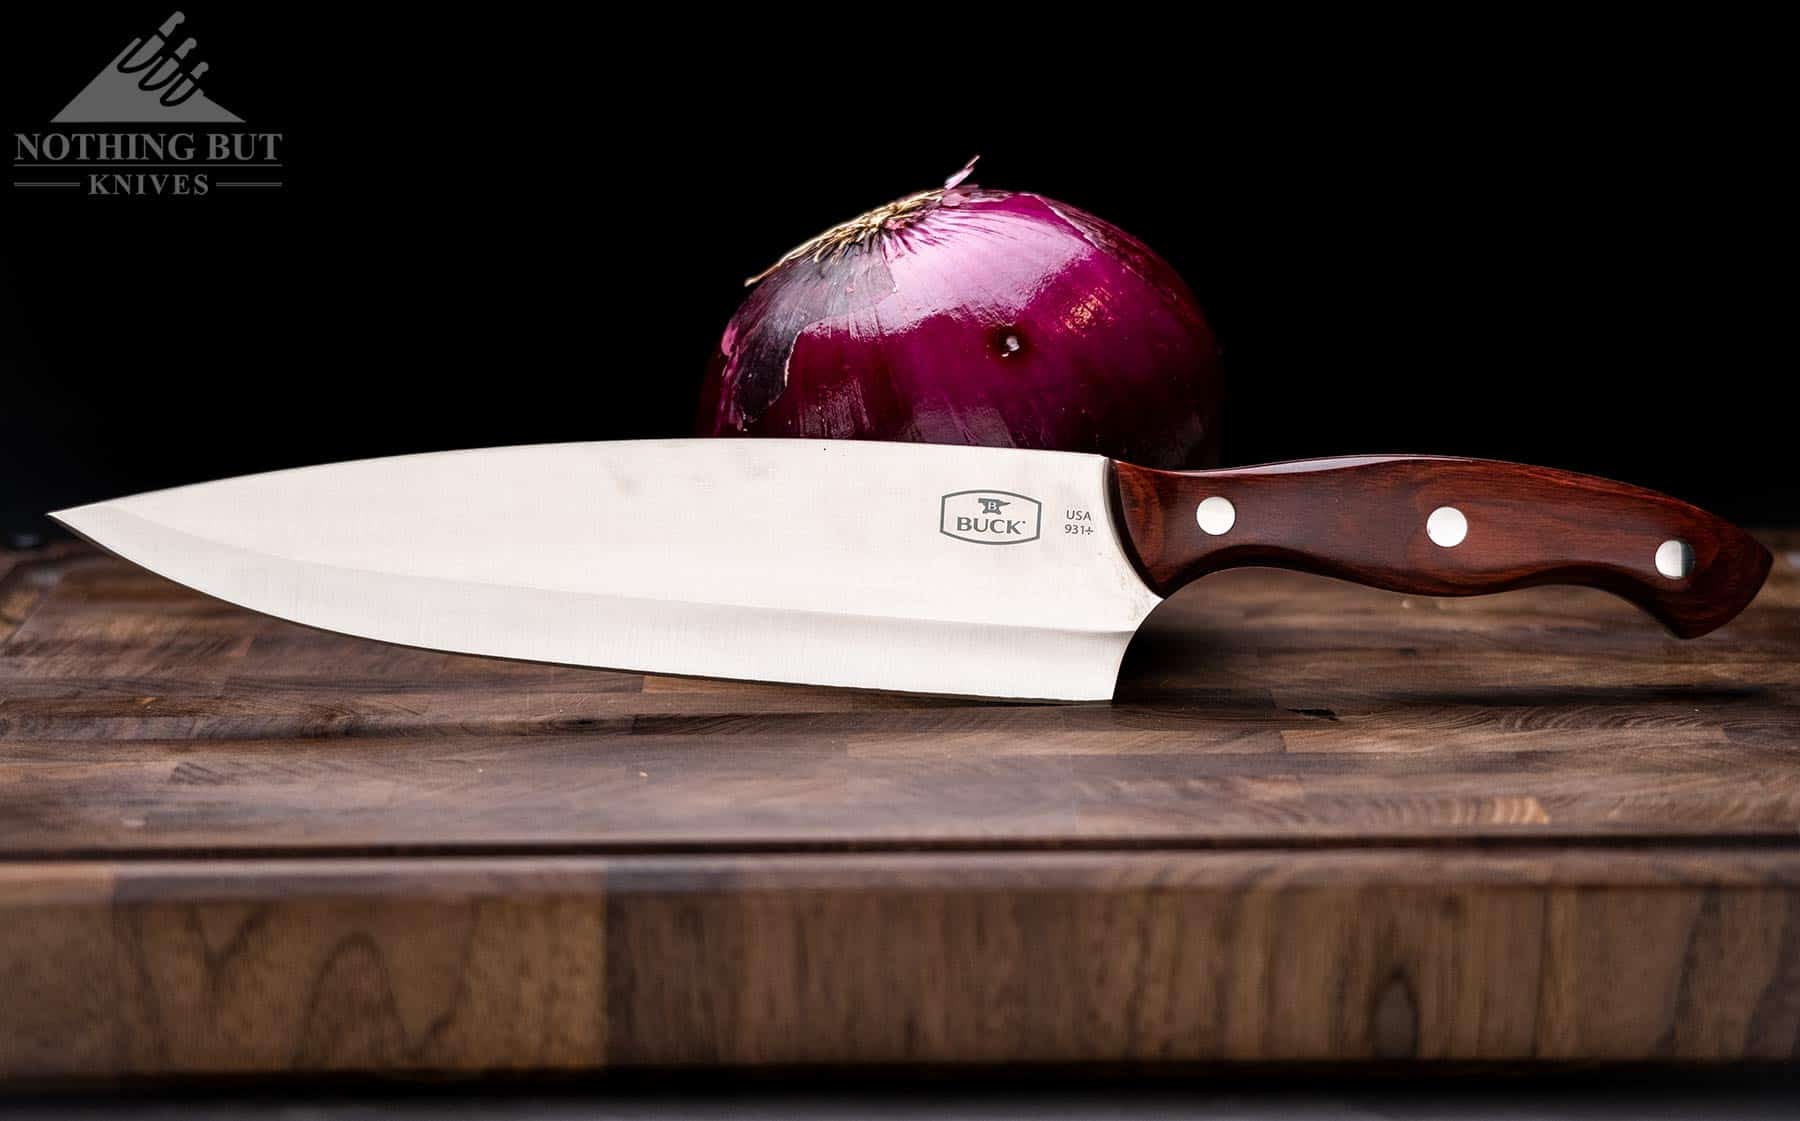 The Buck 931 chef knife is a similarly priced option to the Mattia Borrani chef knife. The Buck is shown here on a wood cutting board with a red onion. 